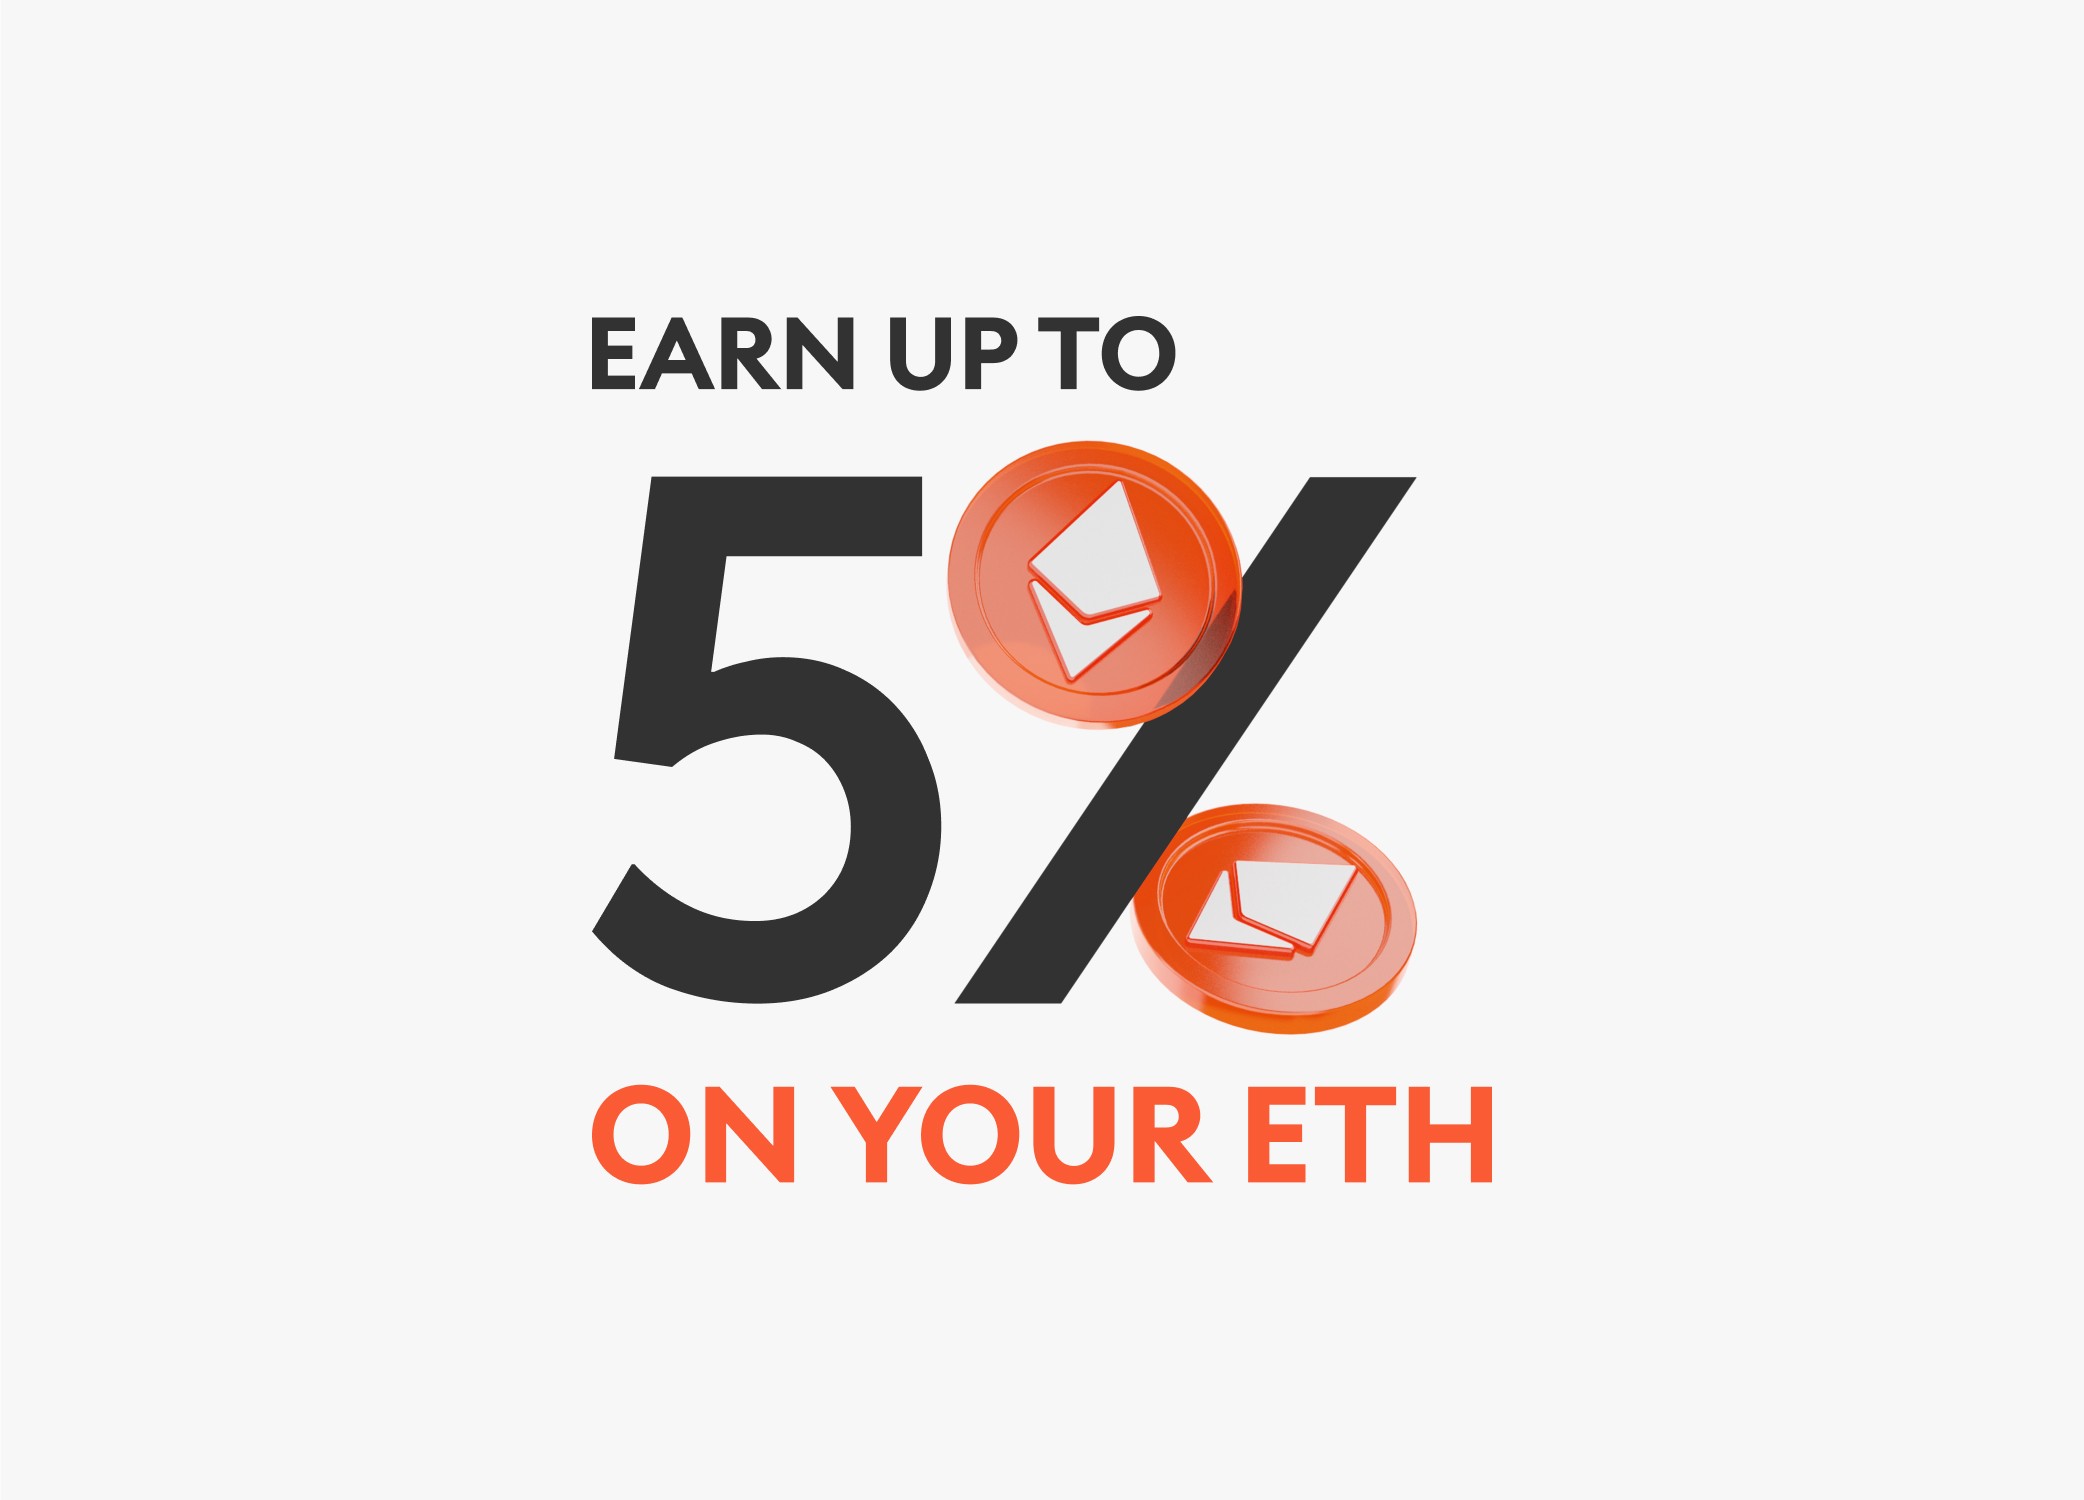 Earn up to 5% on your eth